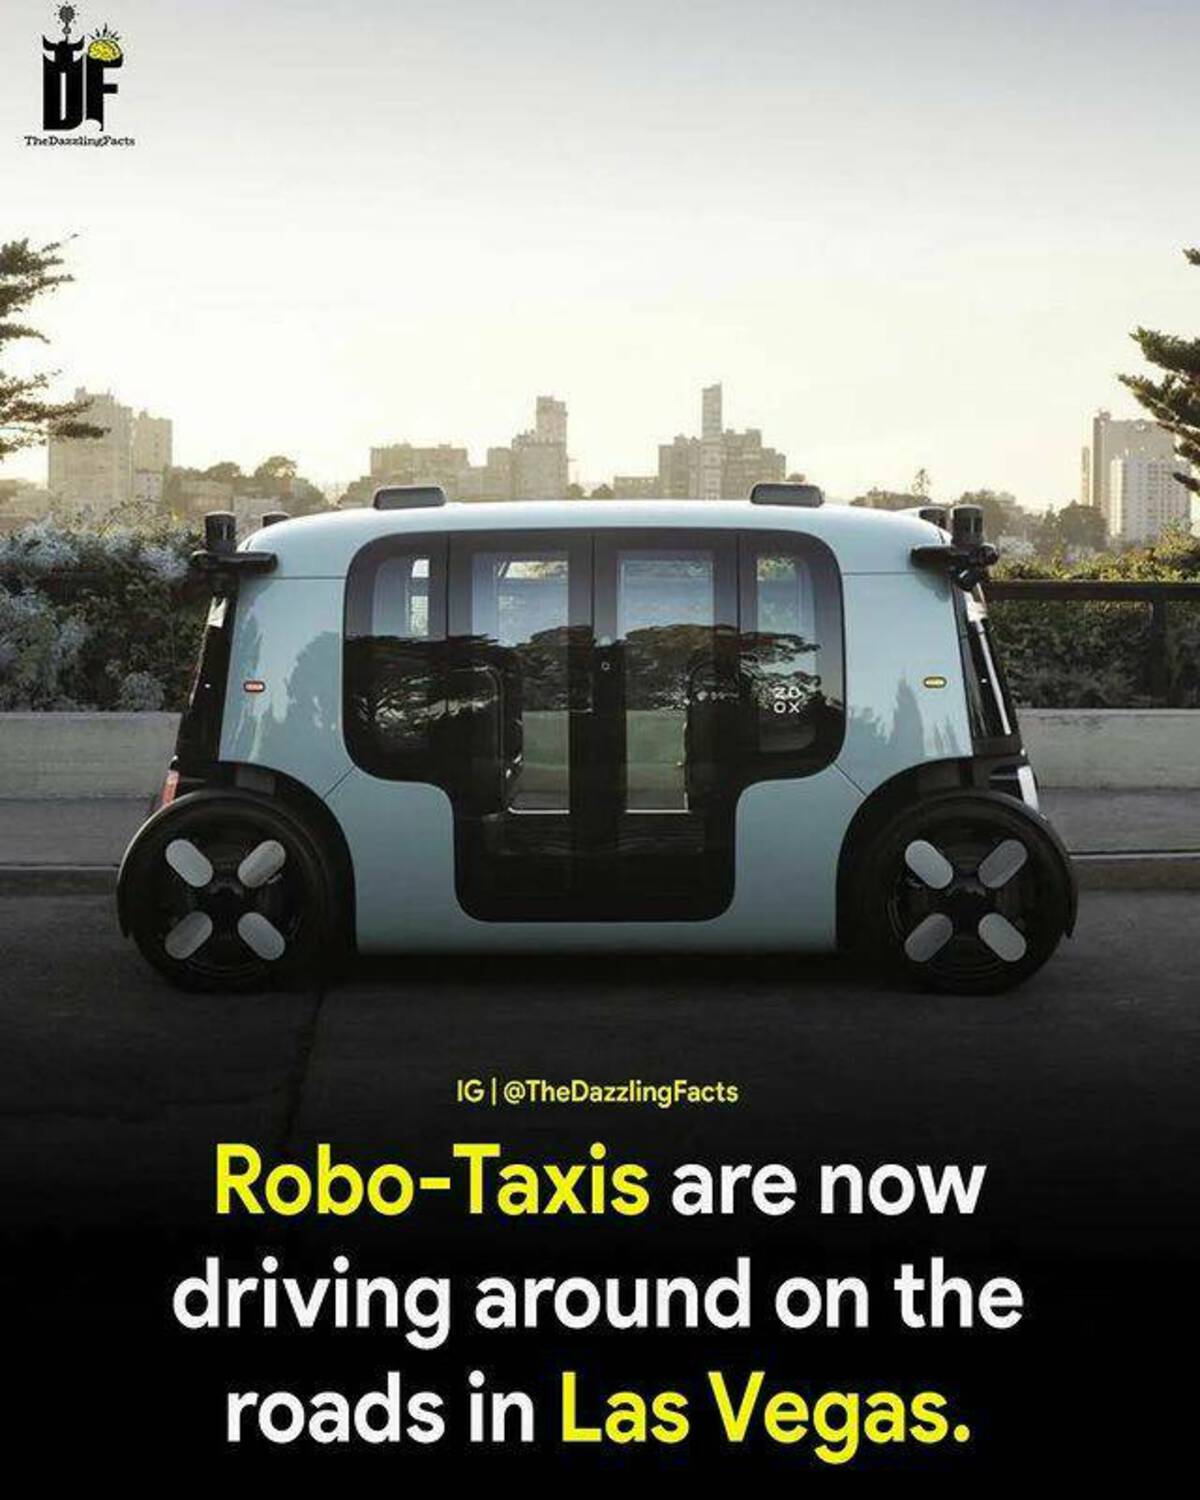 autonomous electric vehicles - The Dazzling Facts 0 Ig Facts RoboTaxis are now driving around on the roads in Las Vegas.